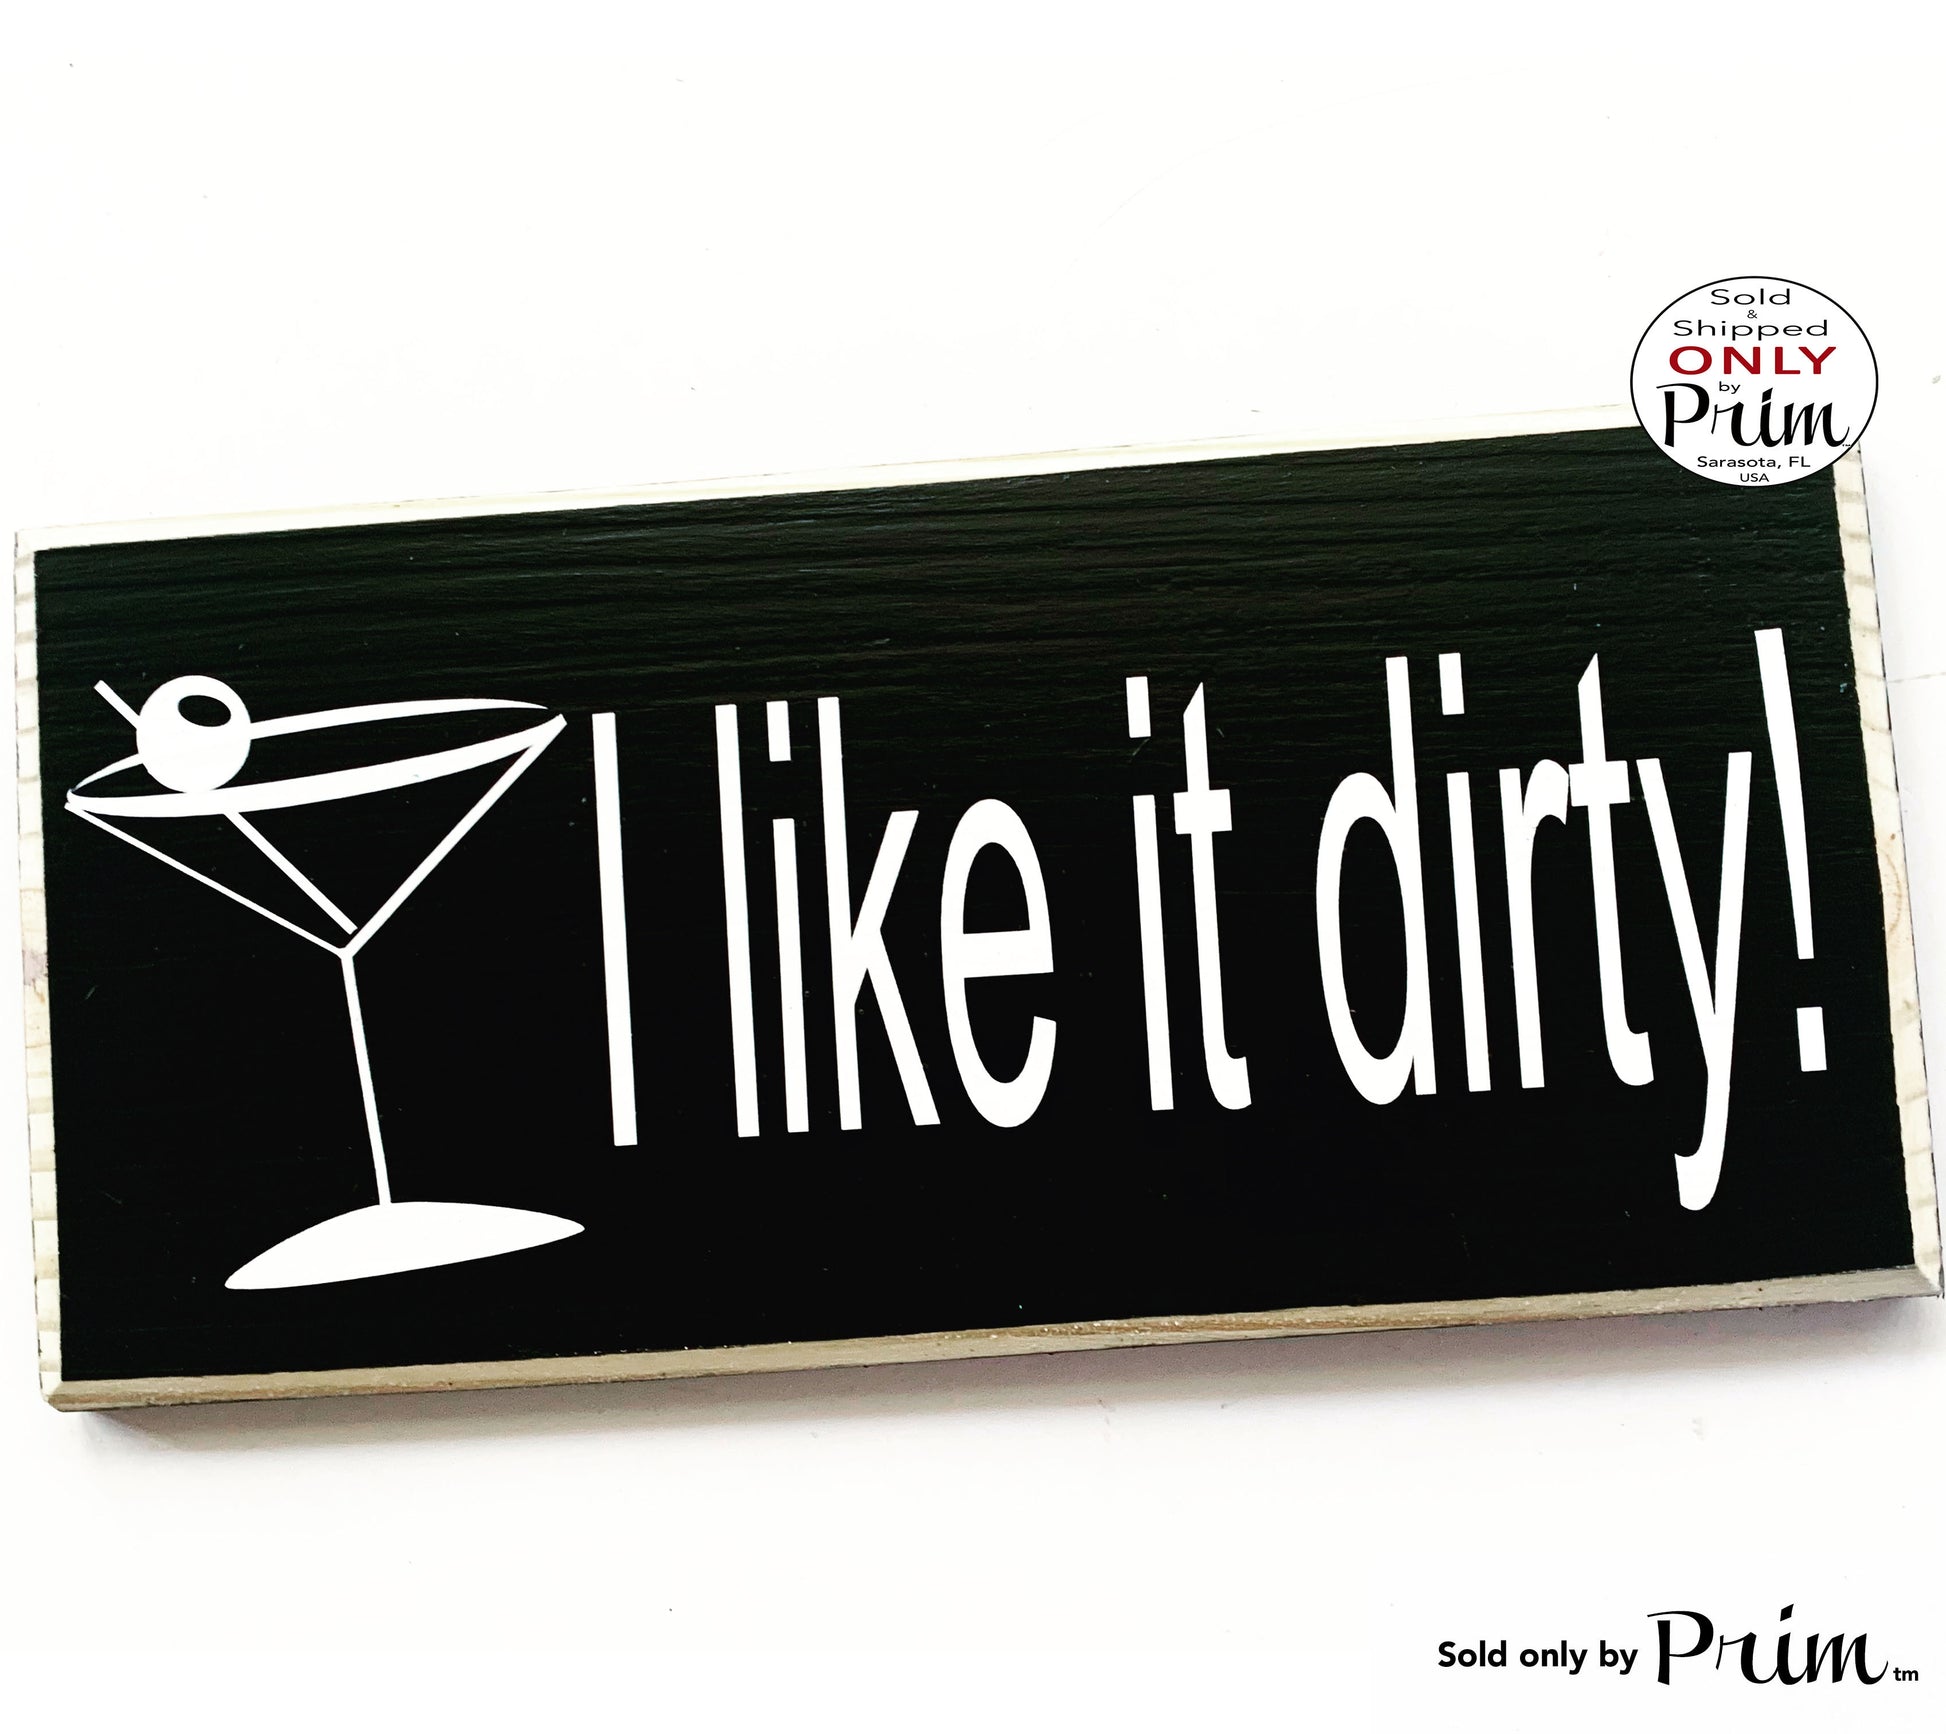 12x6 I Like It Dirty Custom Wood Sign Happy Hour Martini Cocktails Olive Bar Pub Party Plaque Designs by Prim